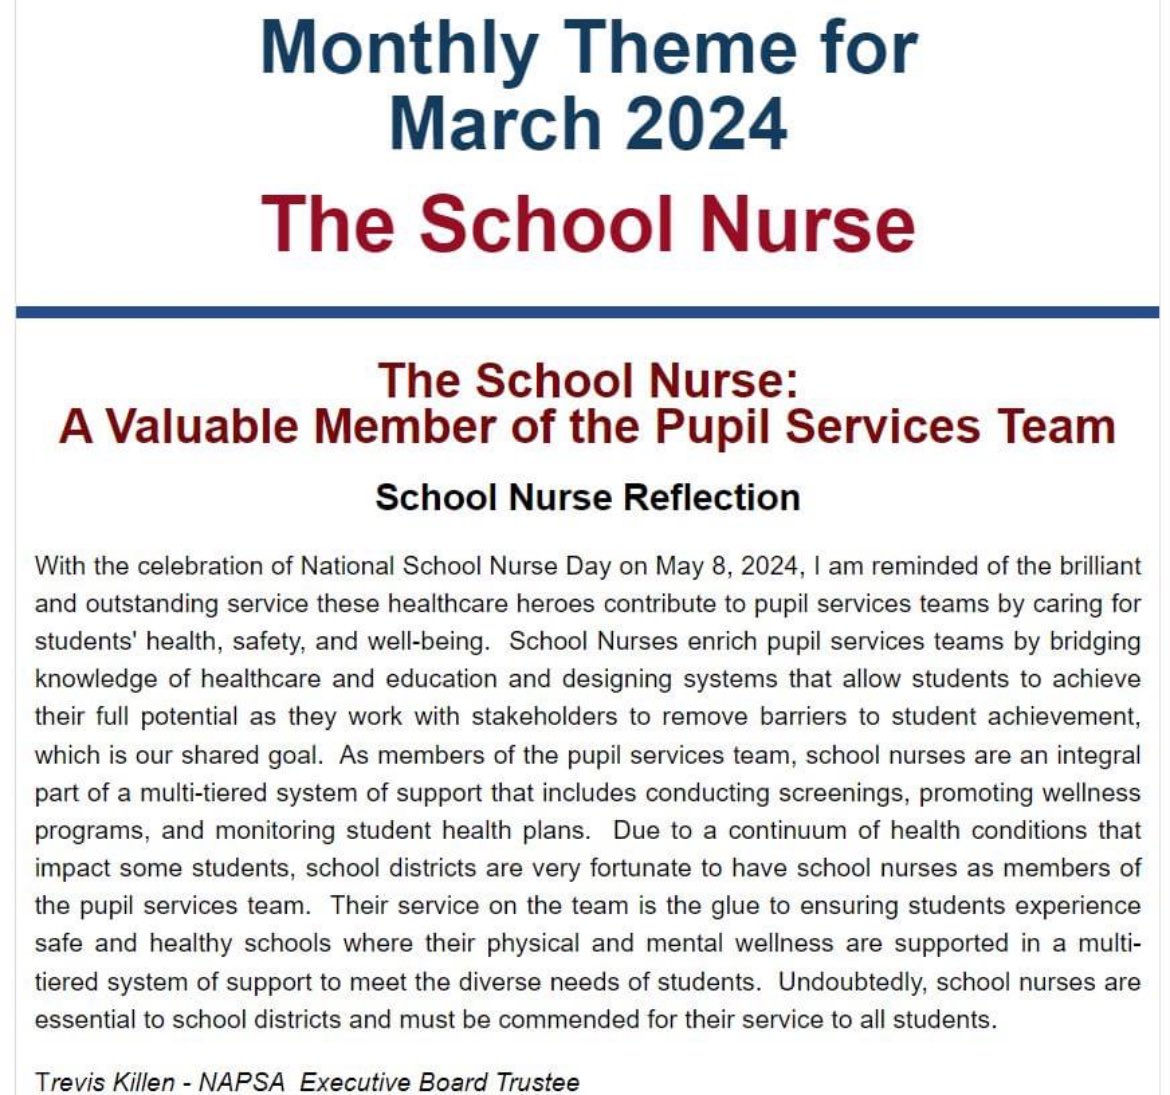 Thank you for the recognition of #SchoolNurses @TrevisKillen National Association of Pupil Services Administrators! #SND2024 #SchoolNursesDay #NursesMonth